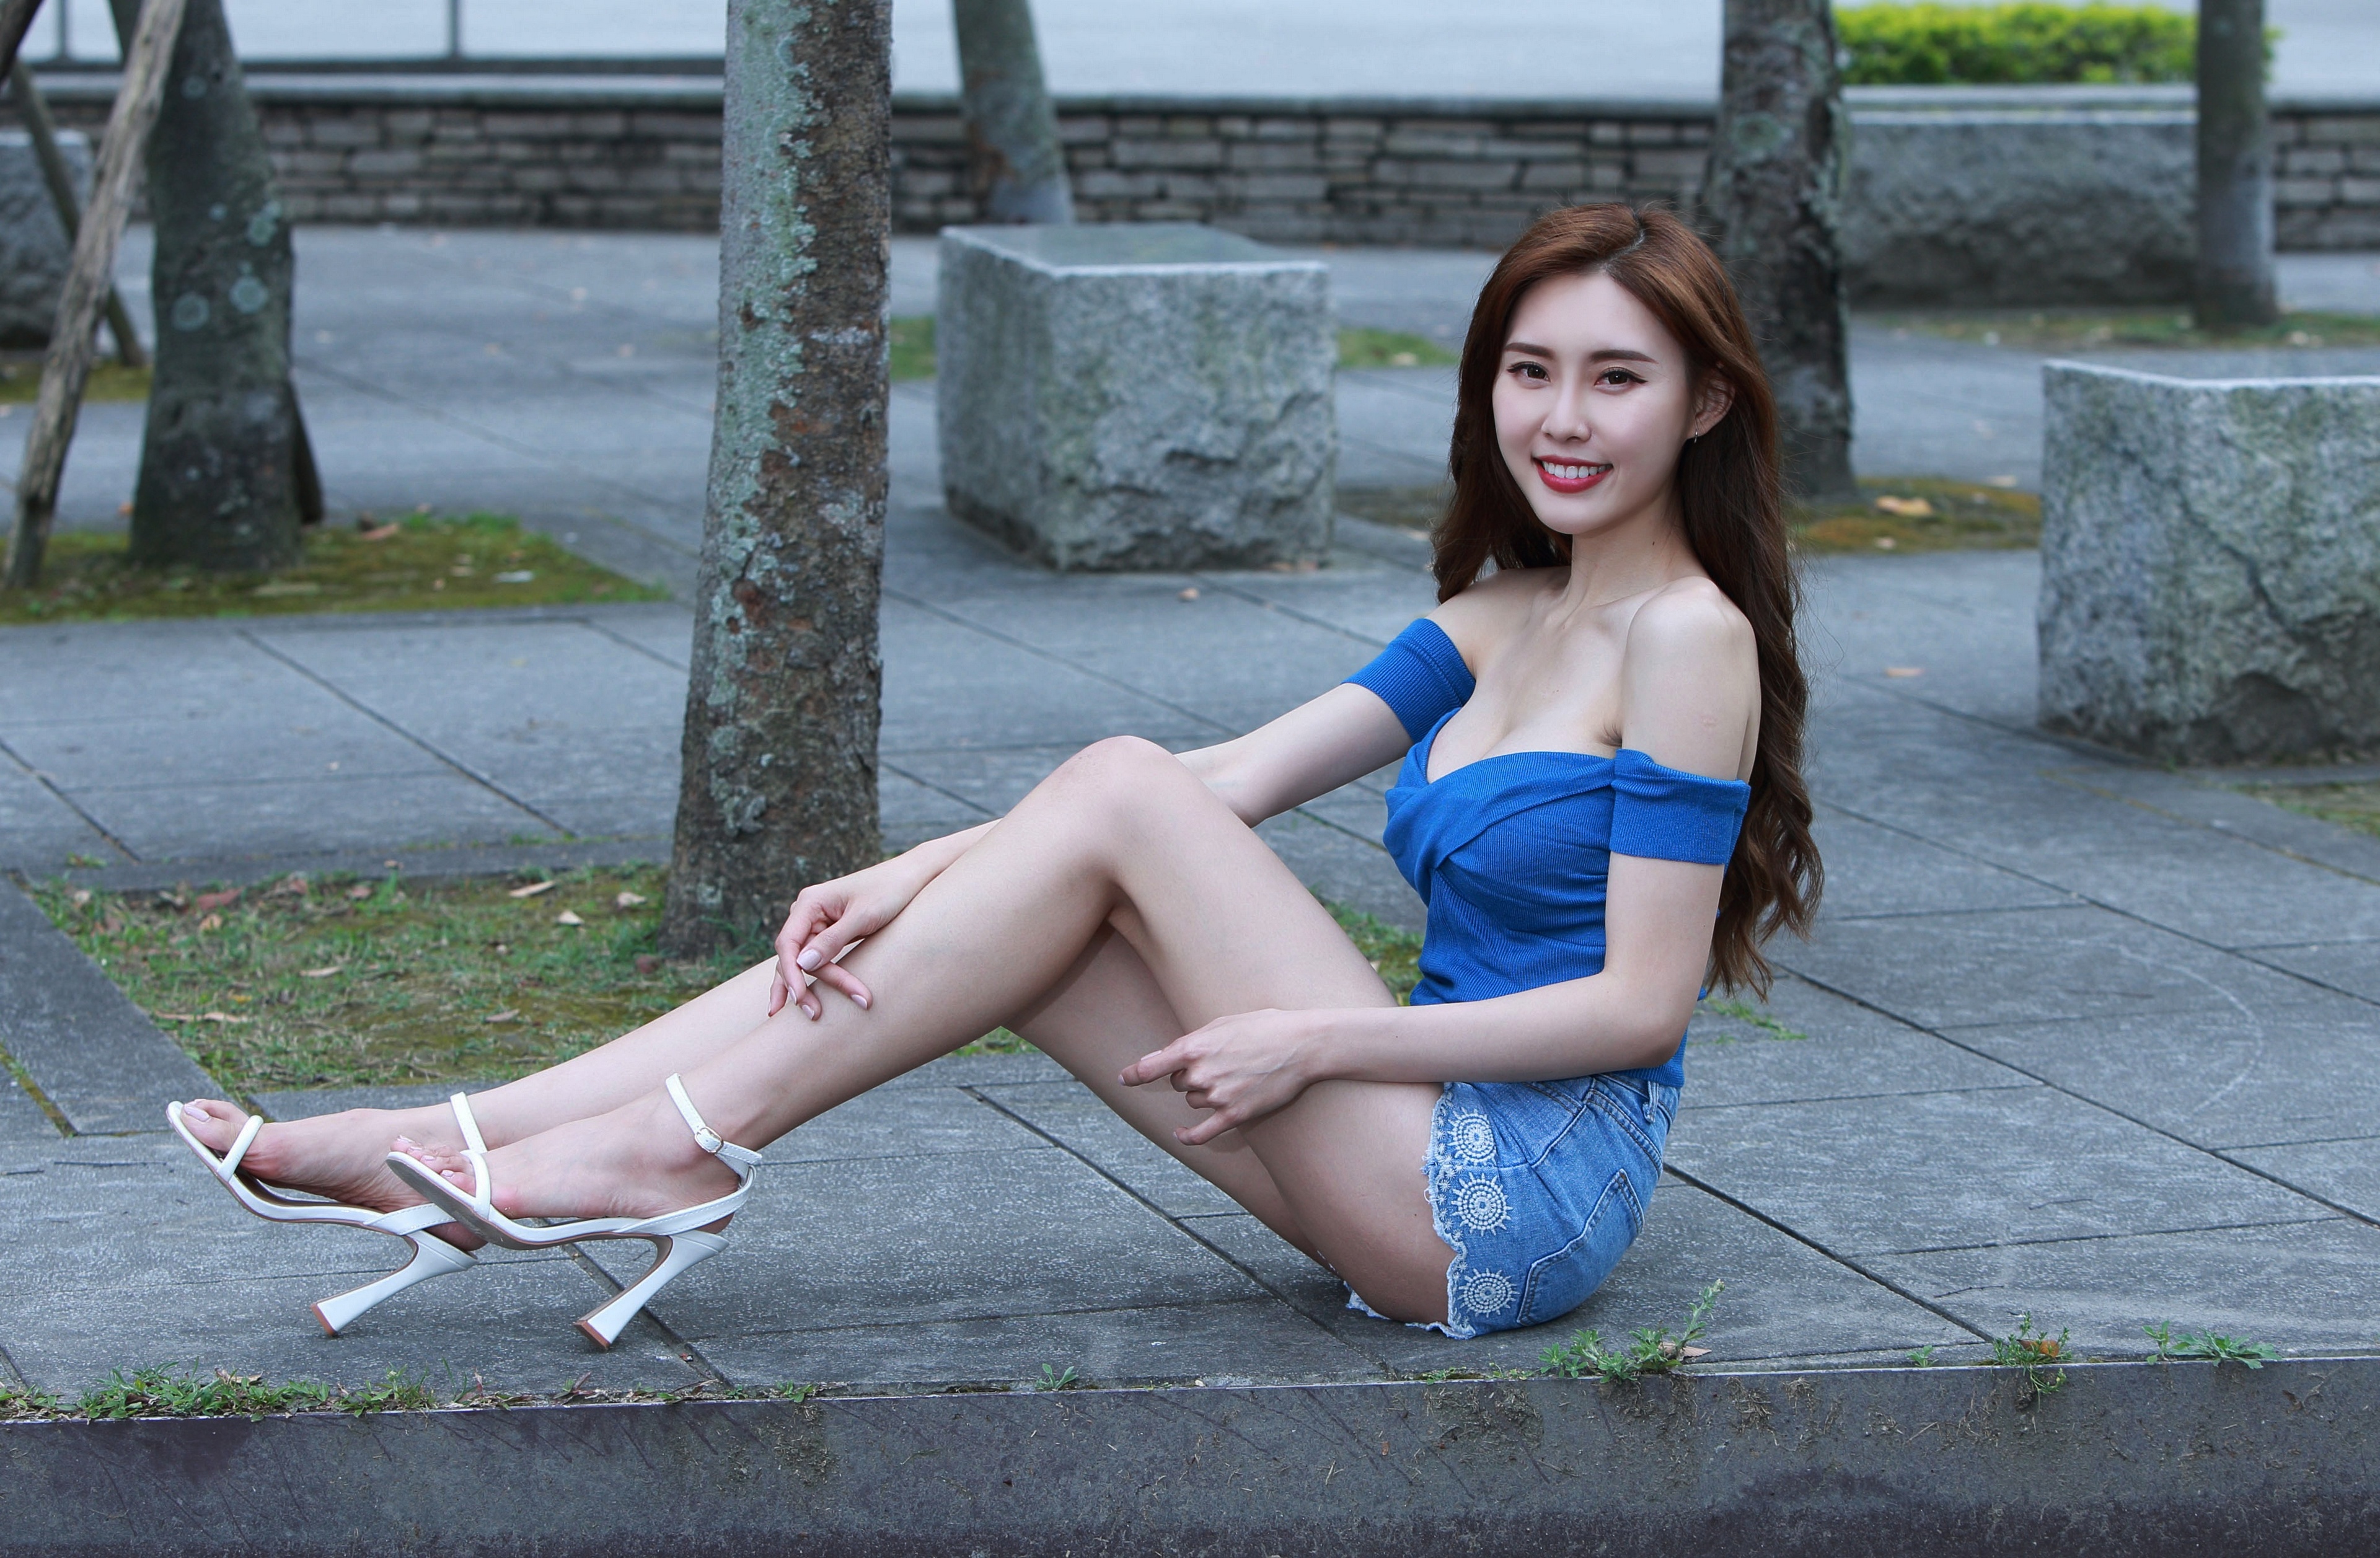 People 3840x2514 Asian model women long hair dark hair sitting barefoot sandal jean shorts blue tops bare shoulders trees stones grass bushes depth of field white heels short shorts smiling red lipstick looking at viewer outdoors dyed hair legs